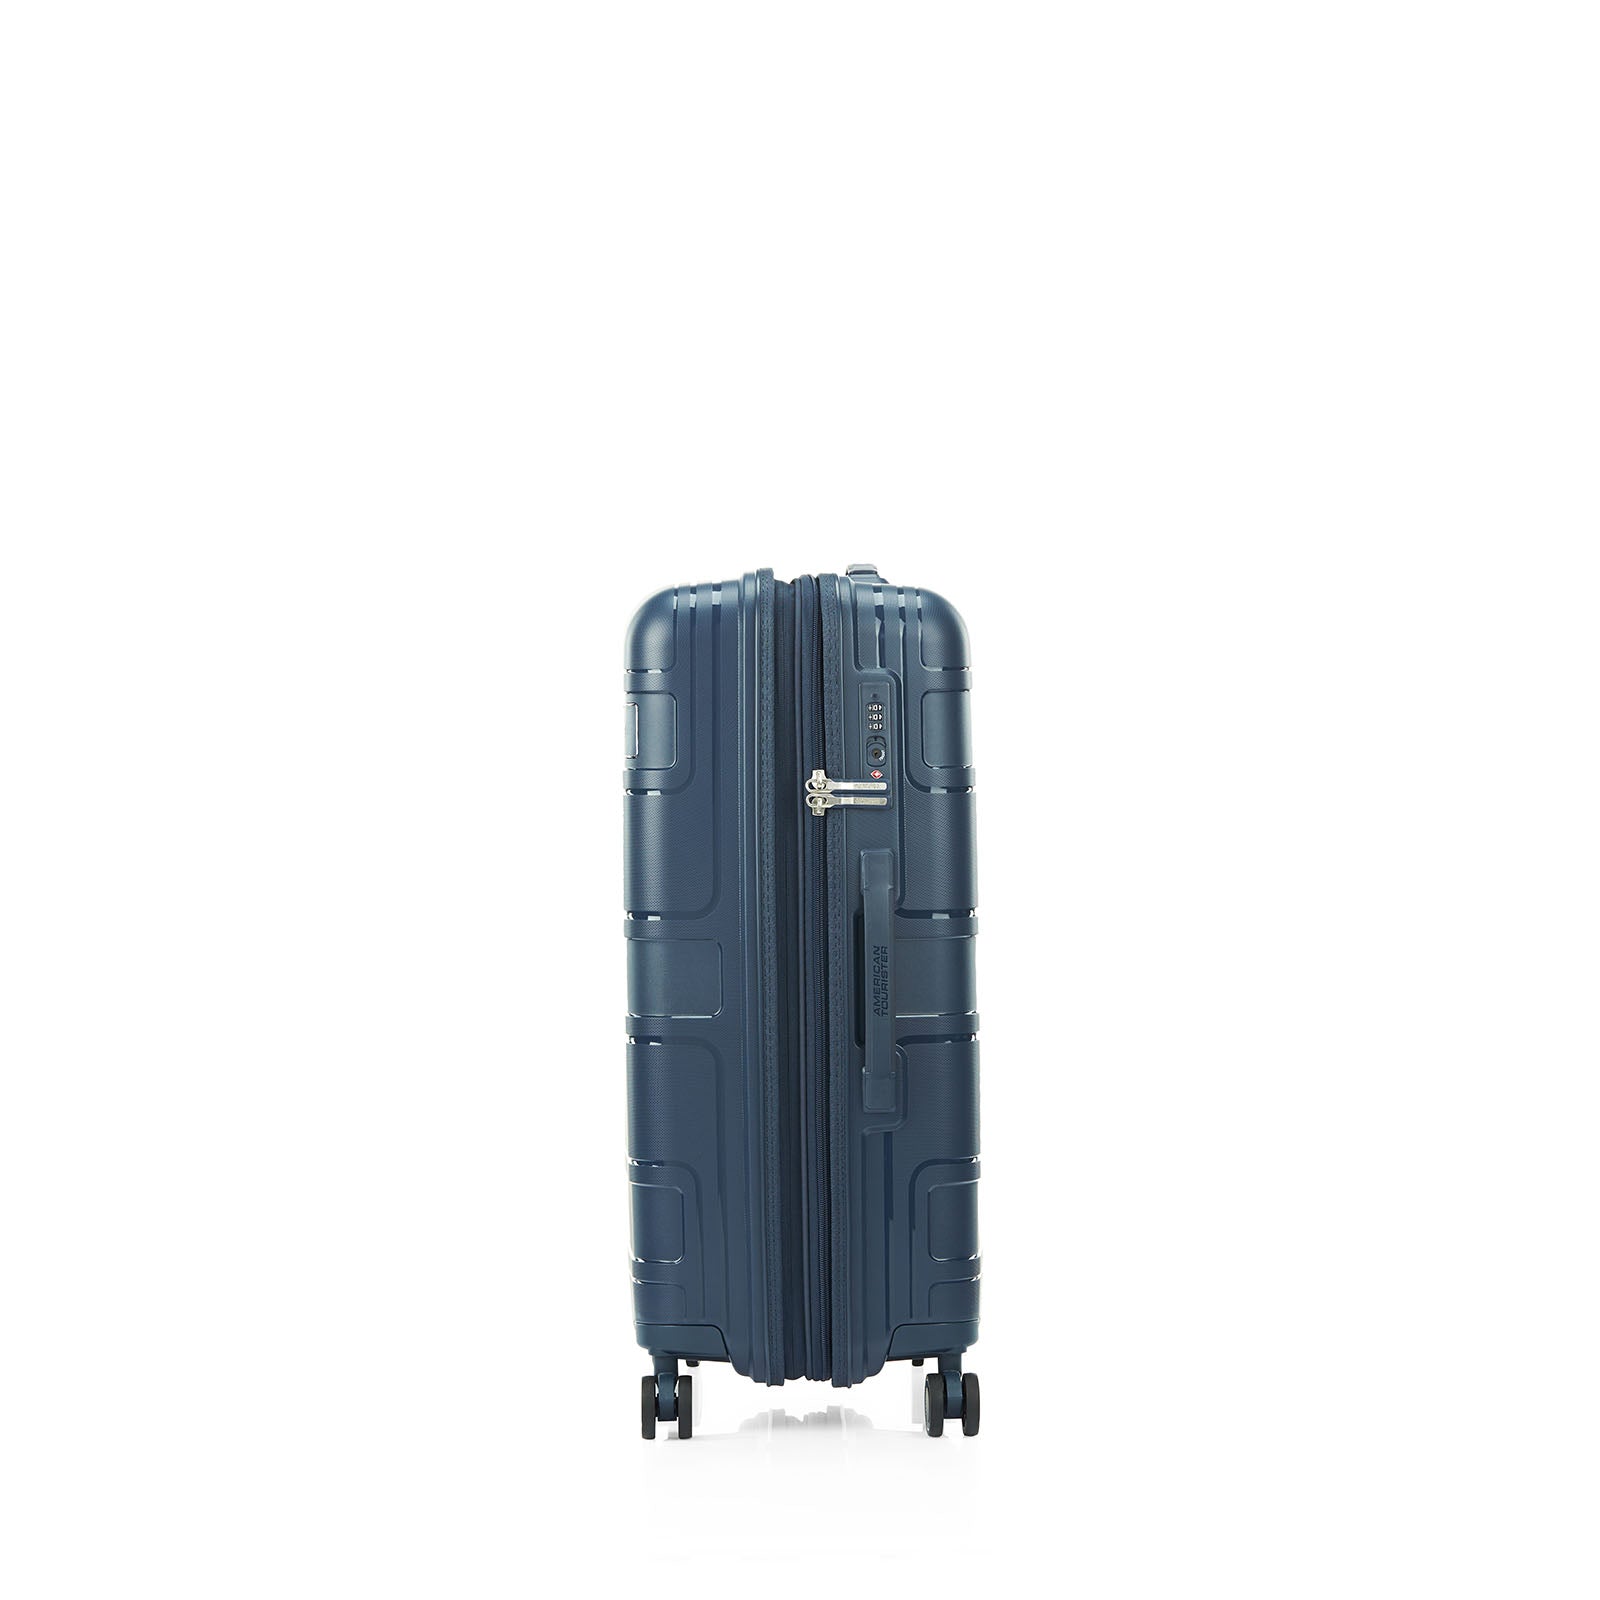 American-Tourister-Light-Max-69cm-Suitcase-Navy-Side-Lock